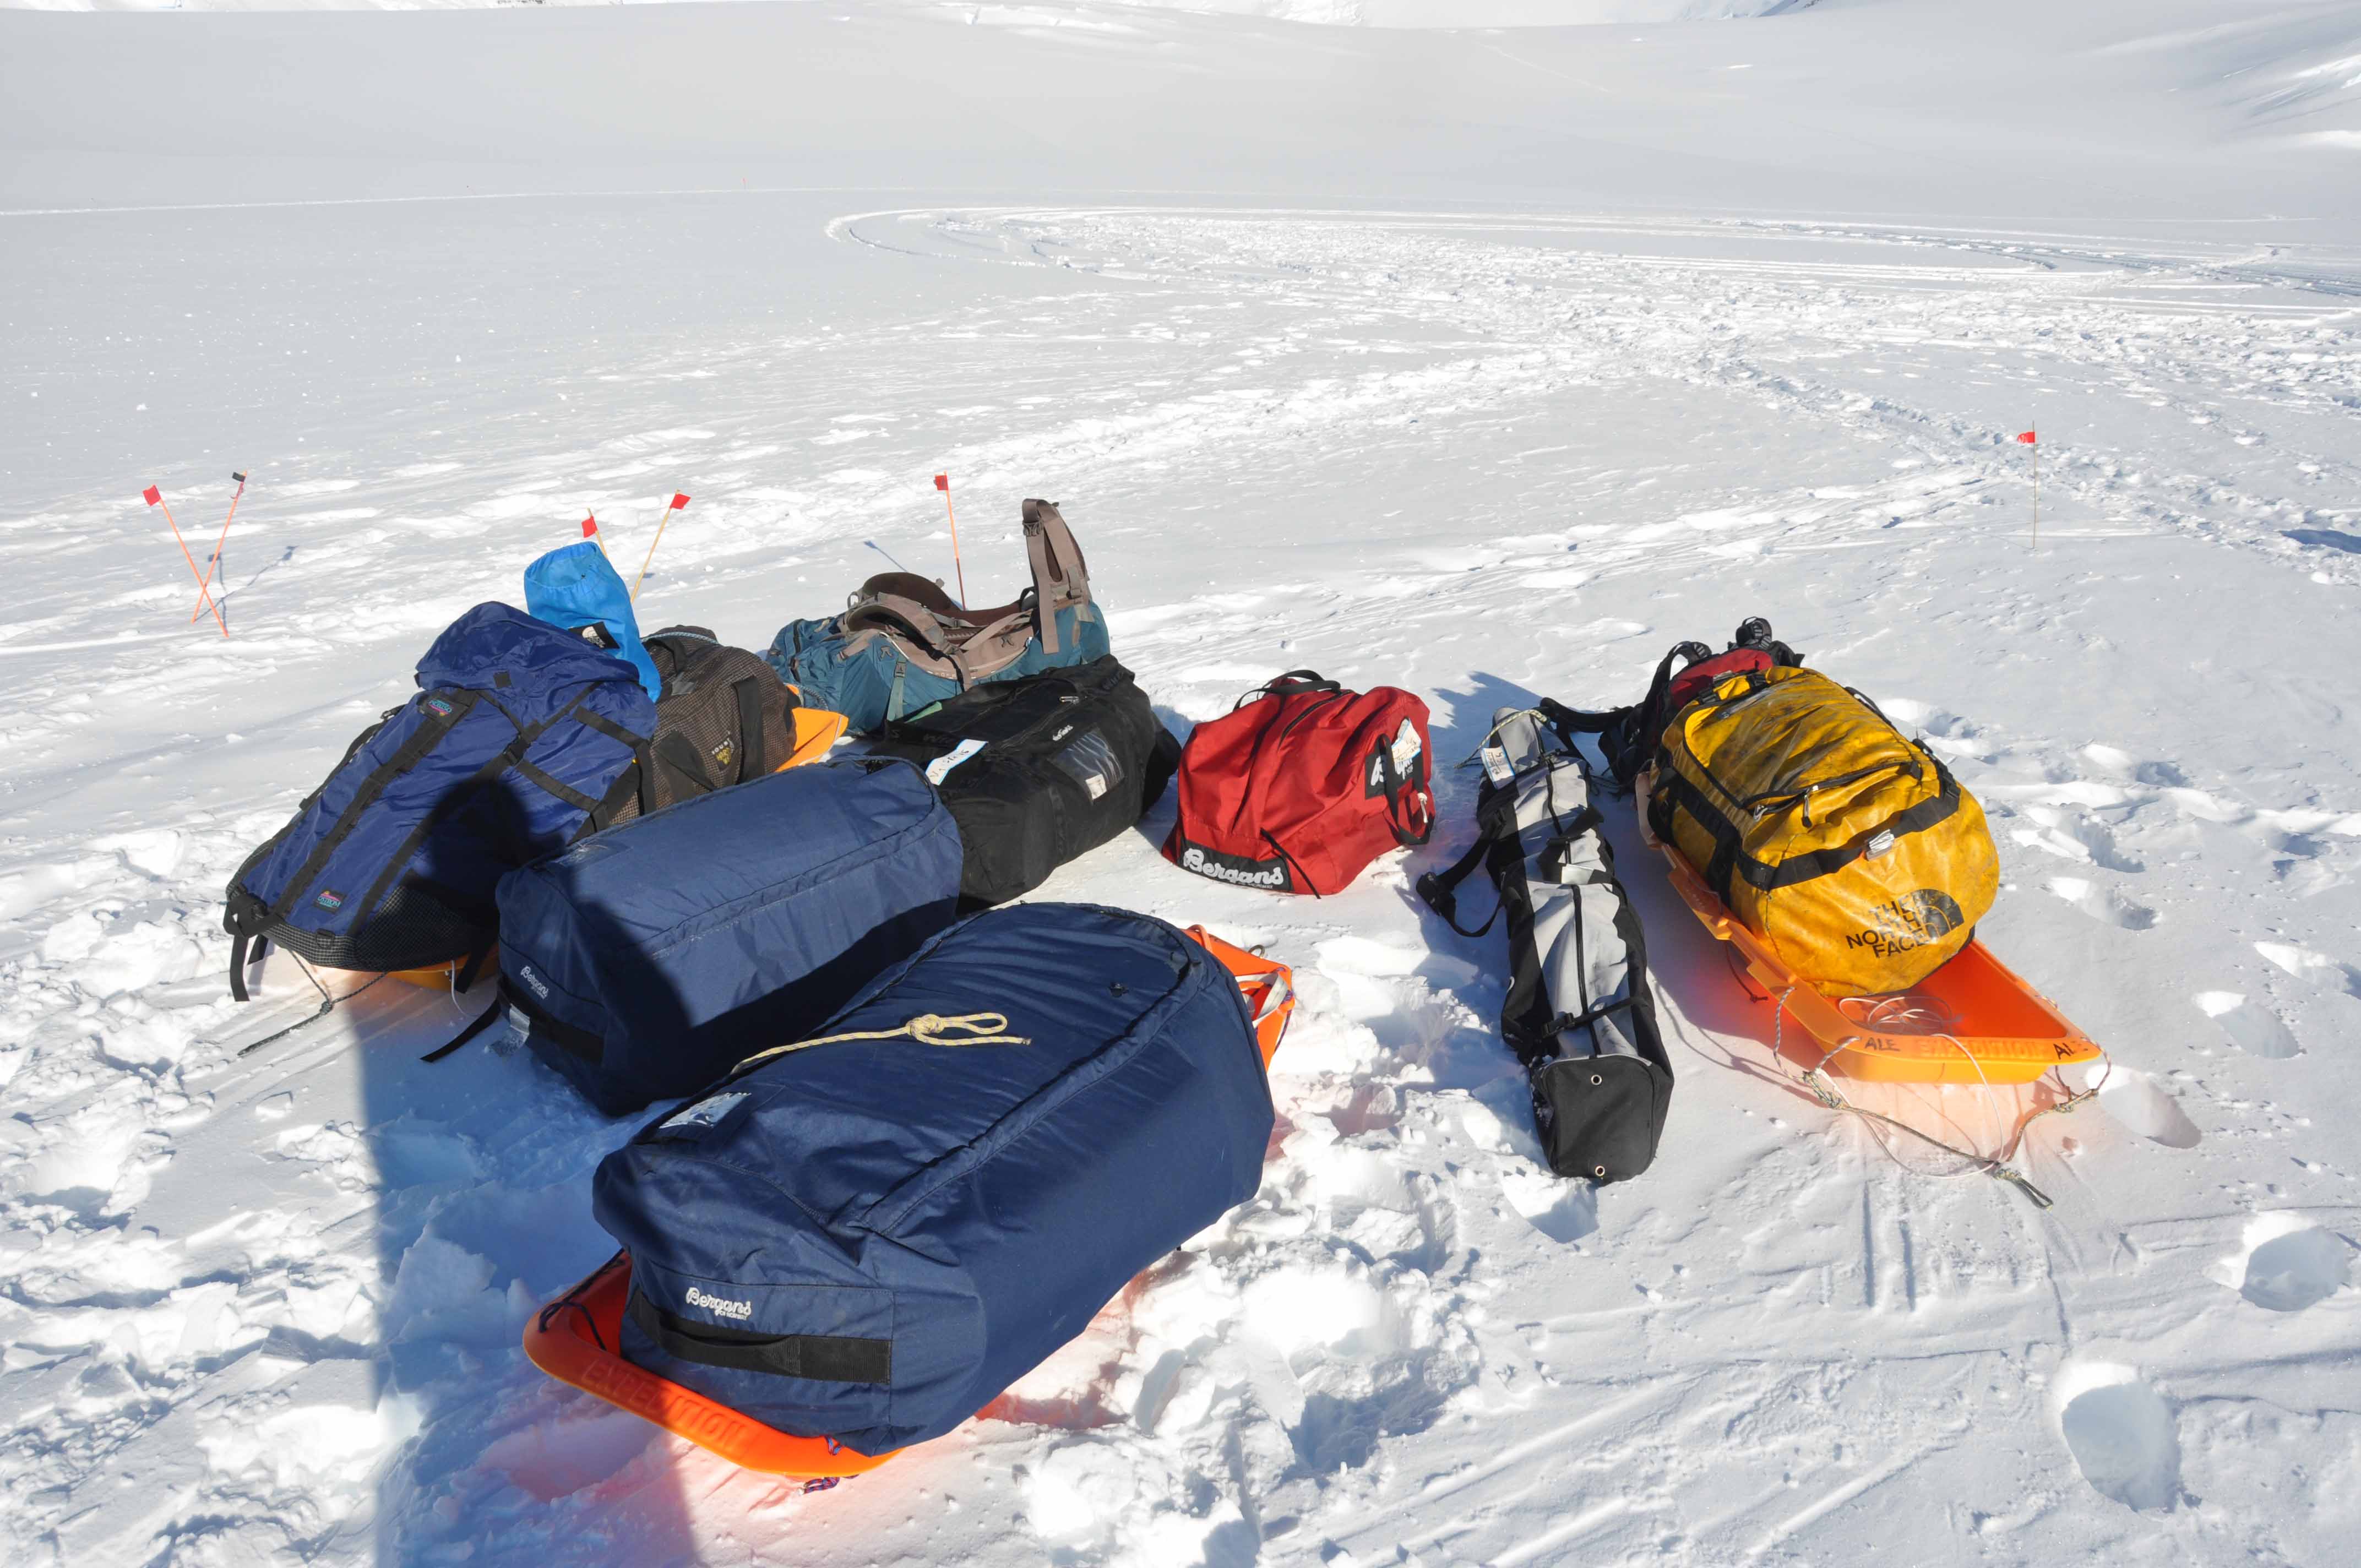 The Gear to Outfit an Arctic Expedition